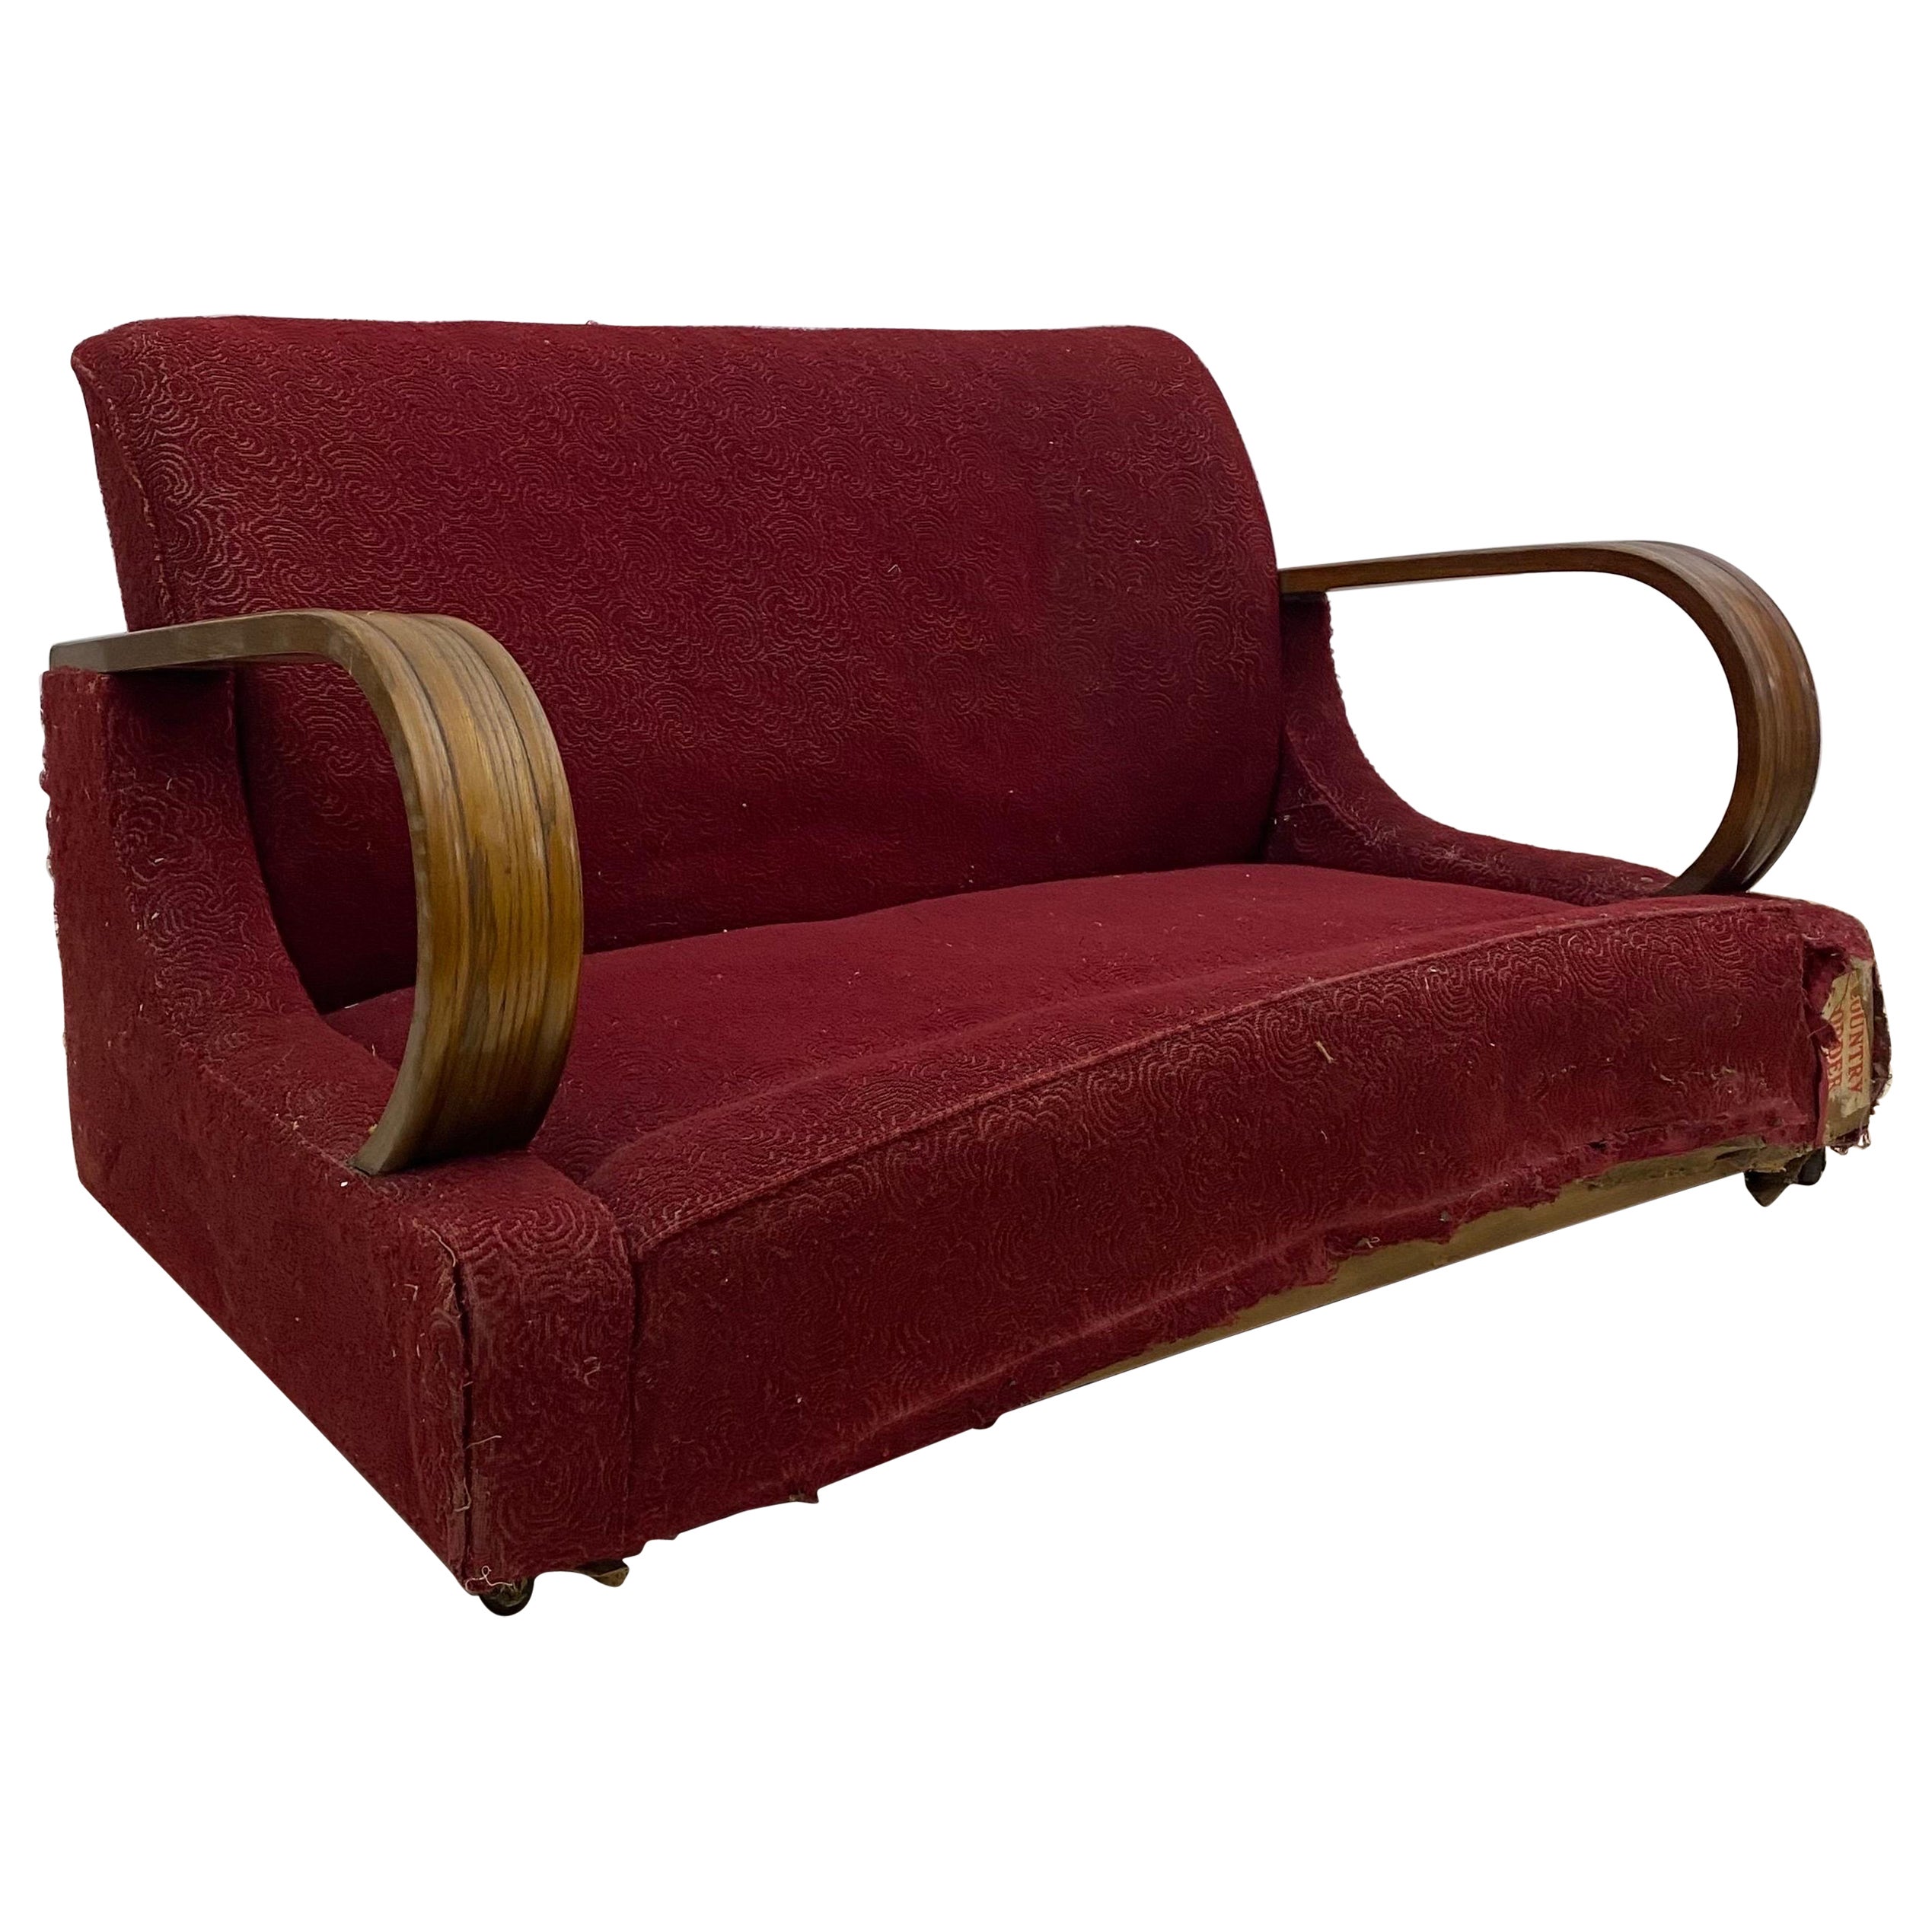 Art Deco 1940s Red Two Seater Distressed Sofa Restoration Project As Seen Poirot en vente